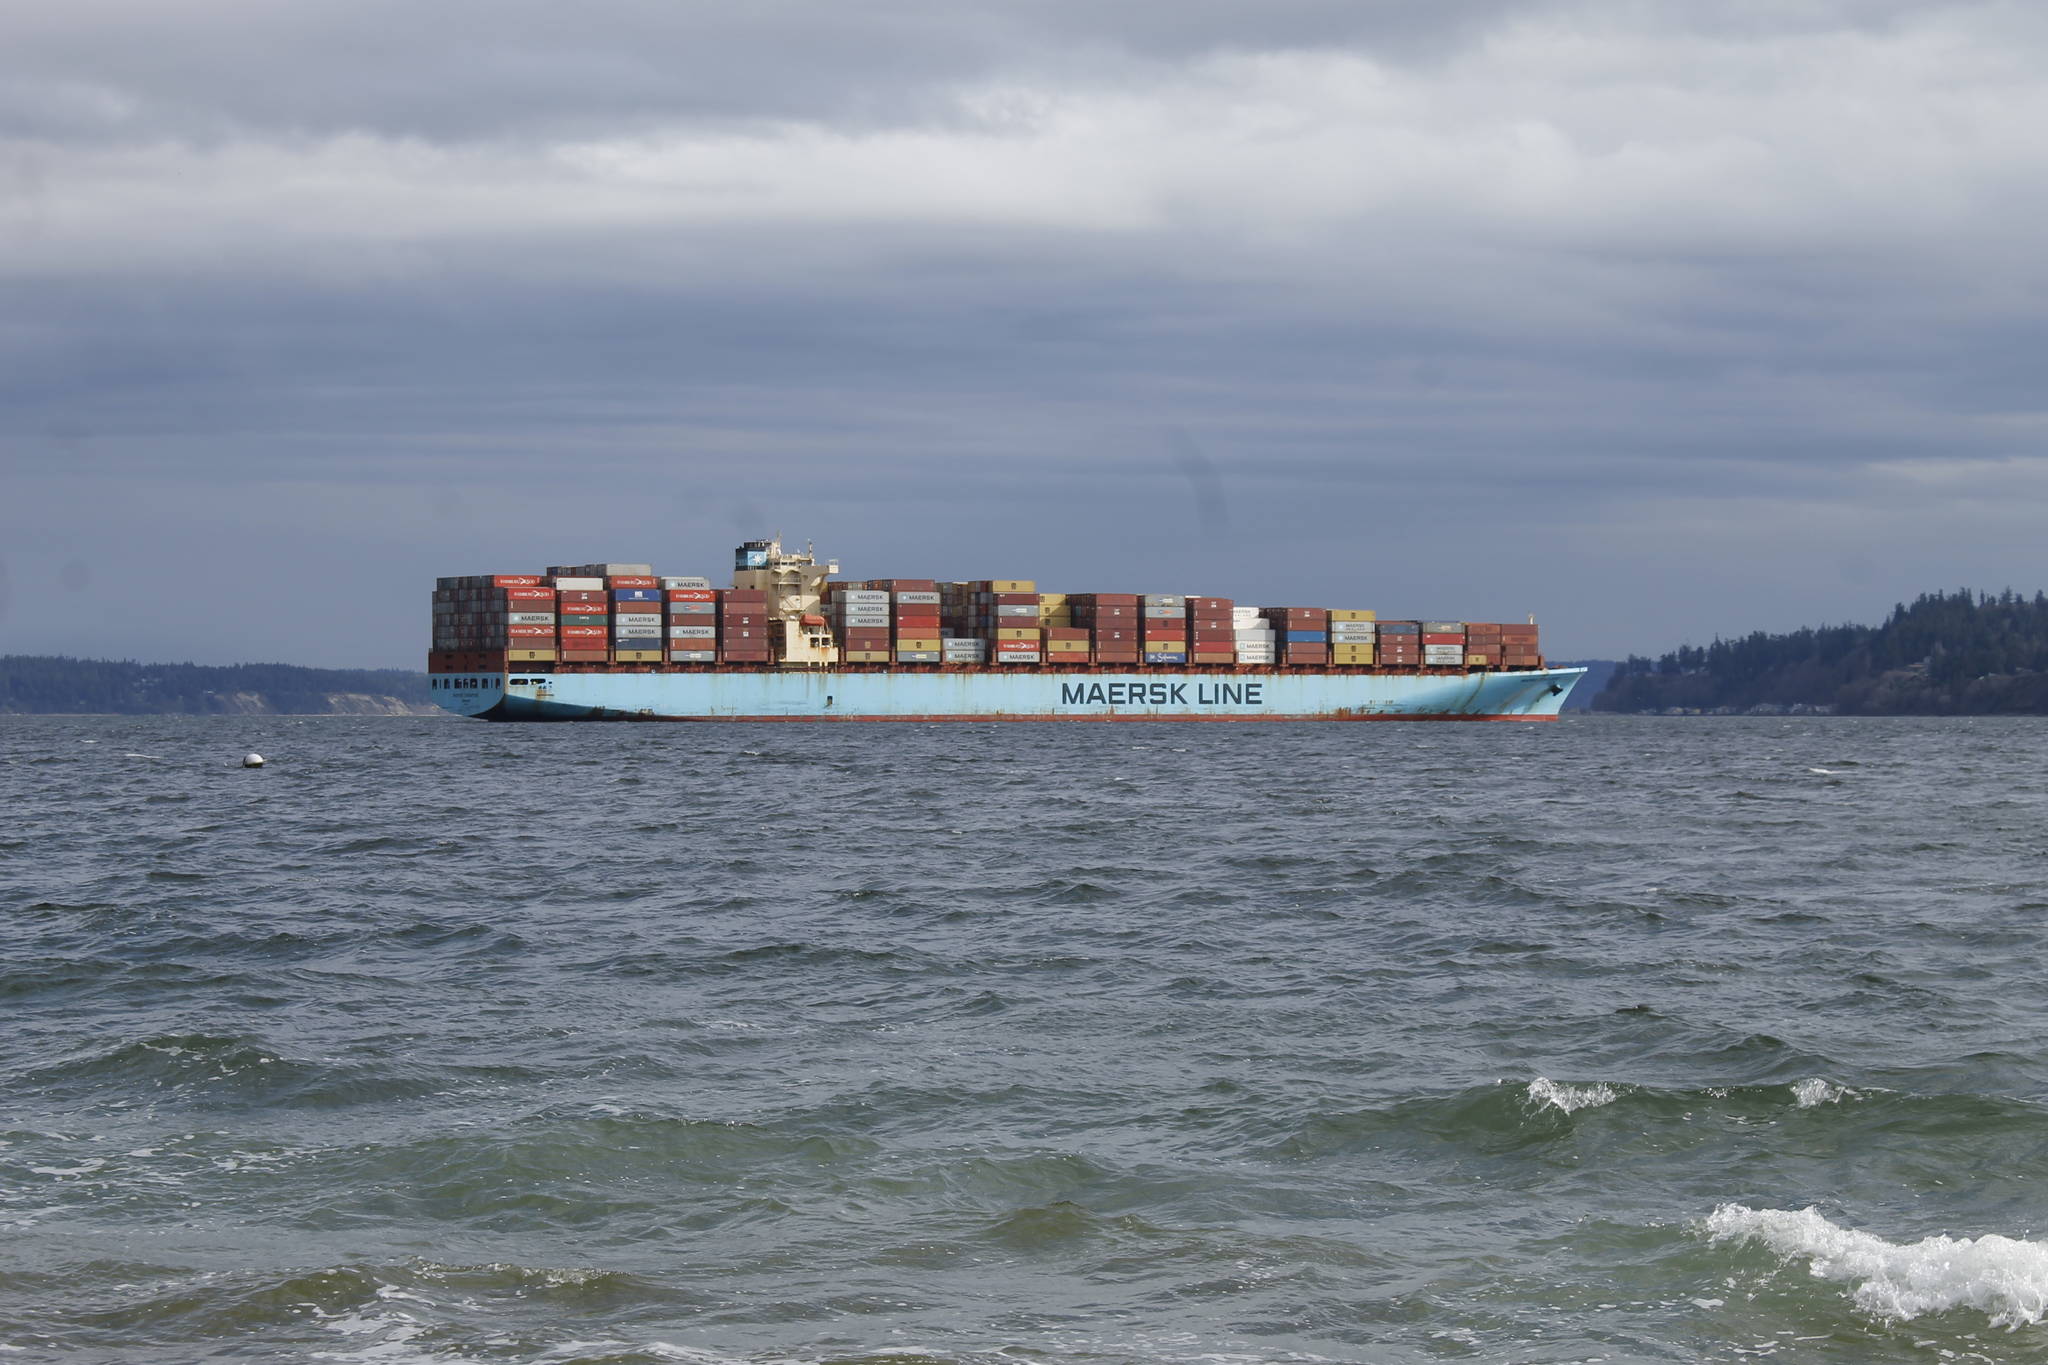 Photo by Kira Erickson/Whidbey News Group
The Maersk Singapore in Holmes Harbor Thursday afternoon.